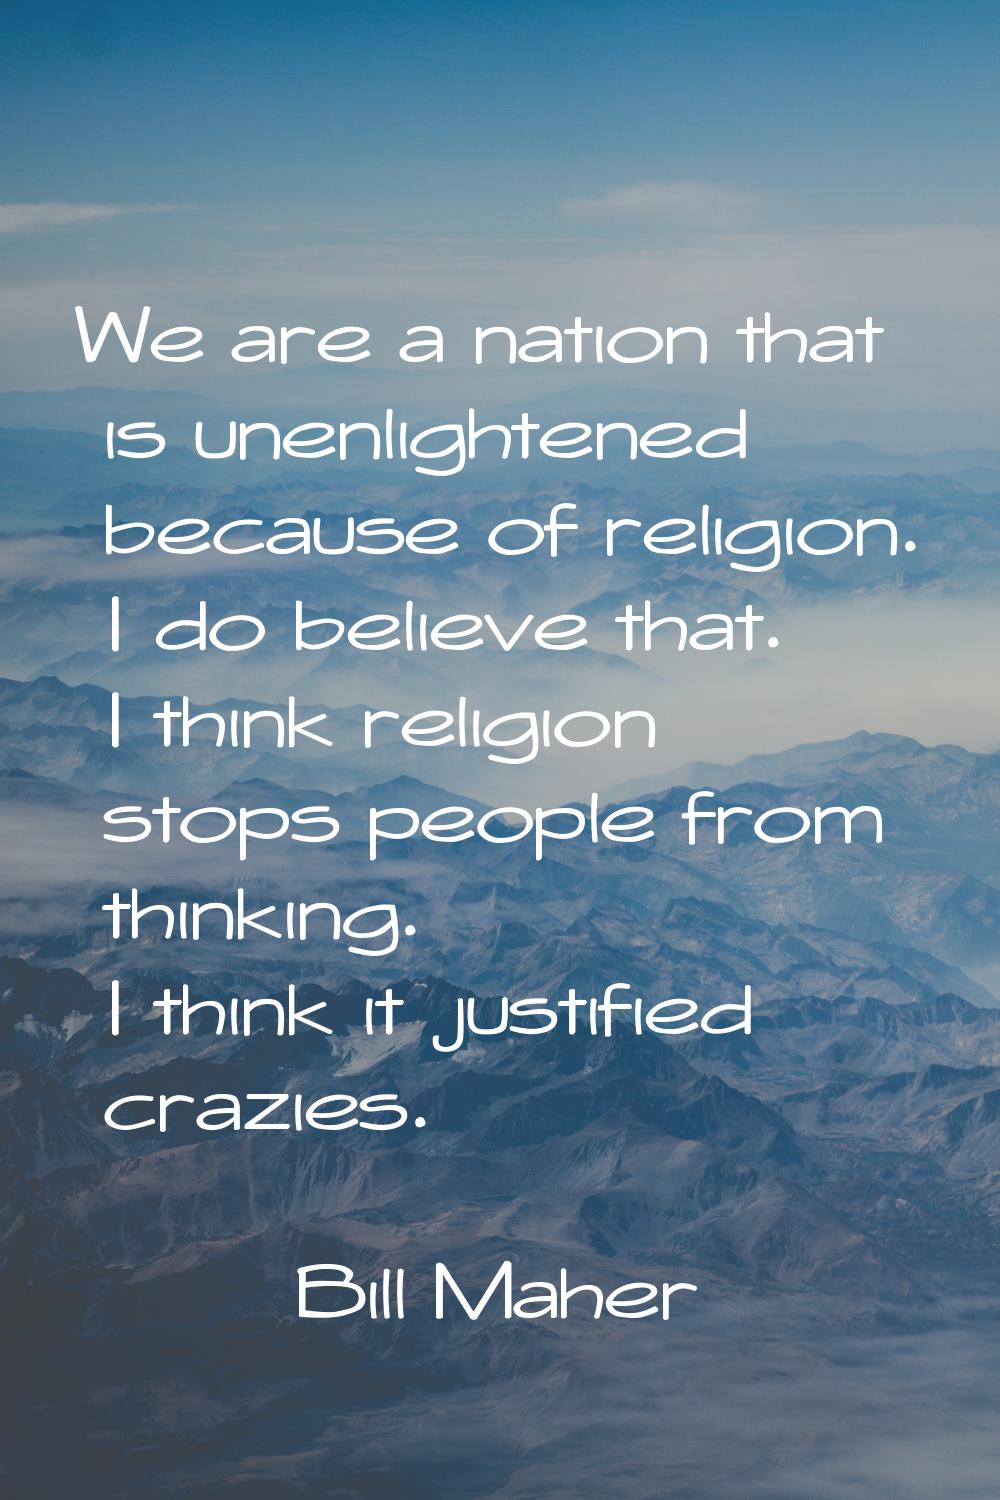 We are a nation that is unenlightened because of religion. I do believe that. I think religion stop